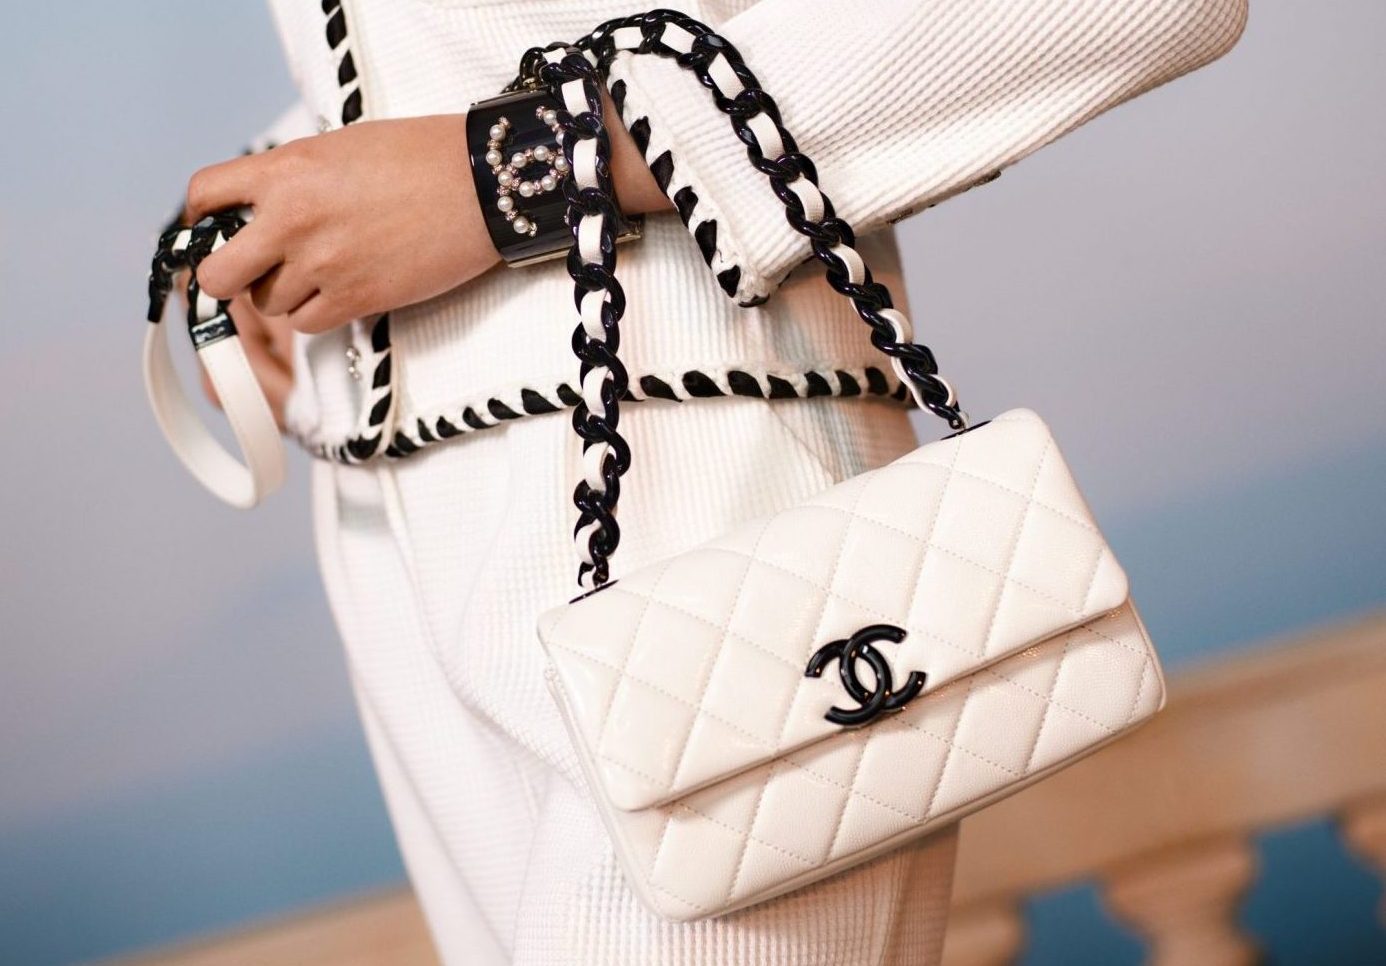 Chanel Price Increase 2023